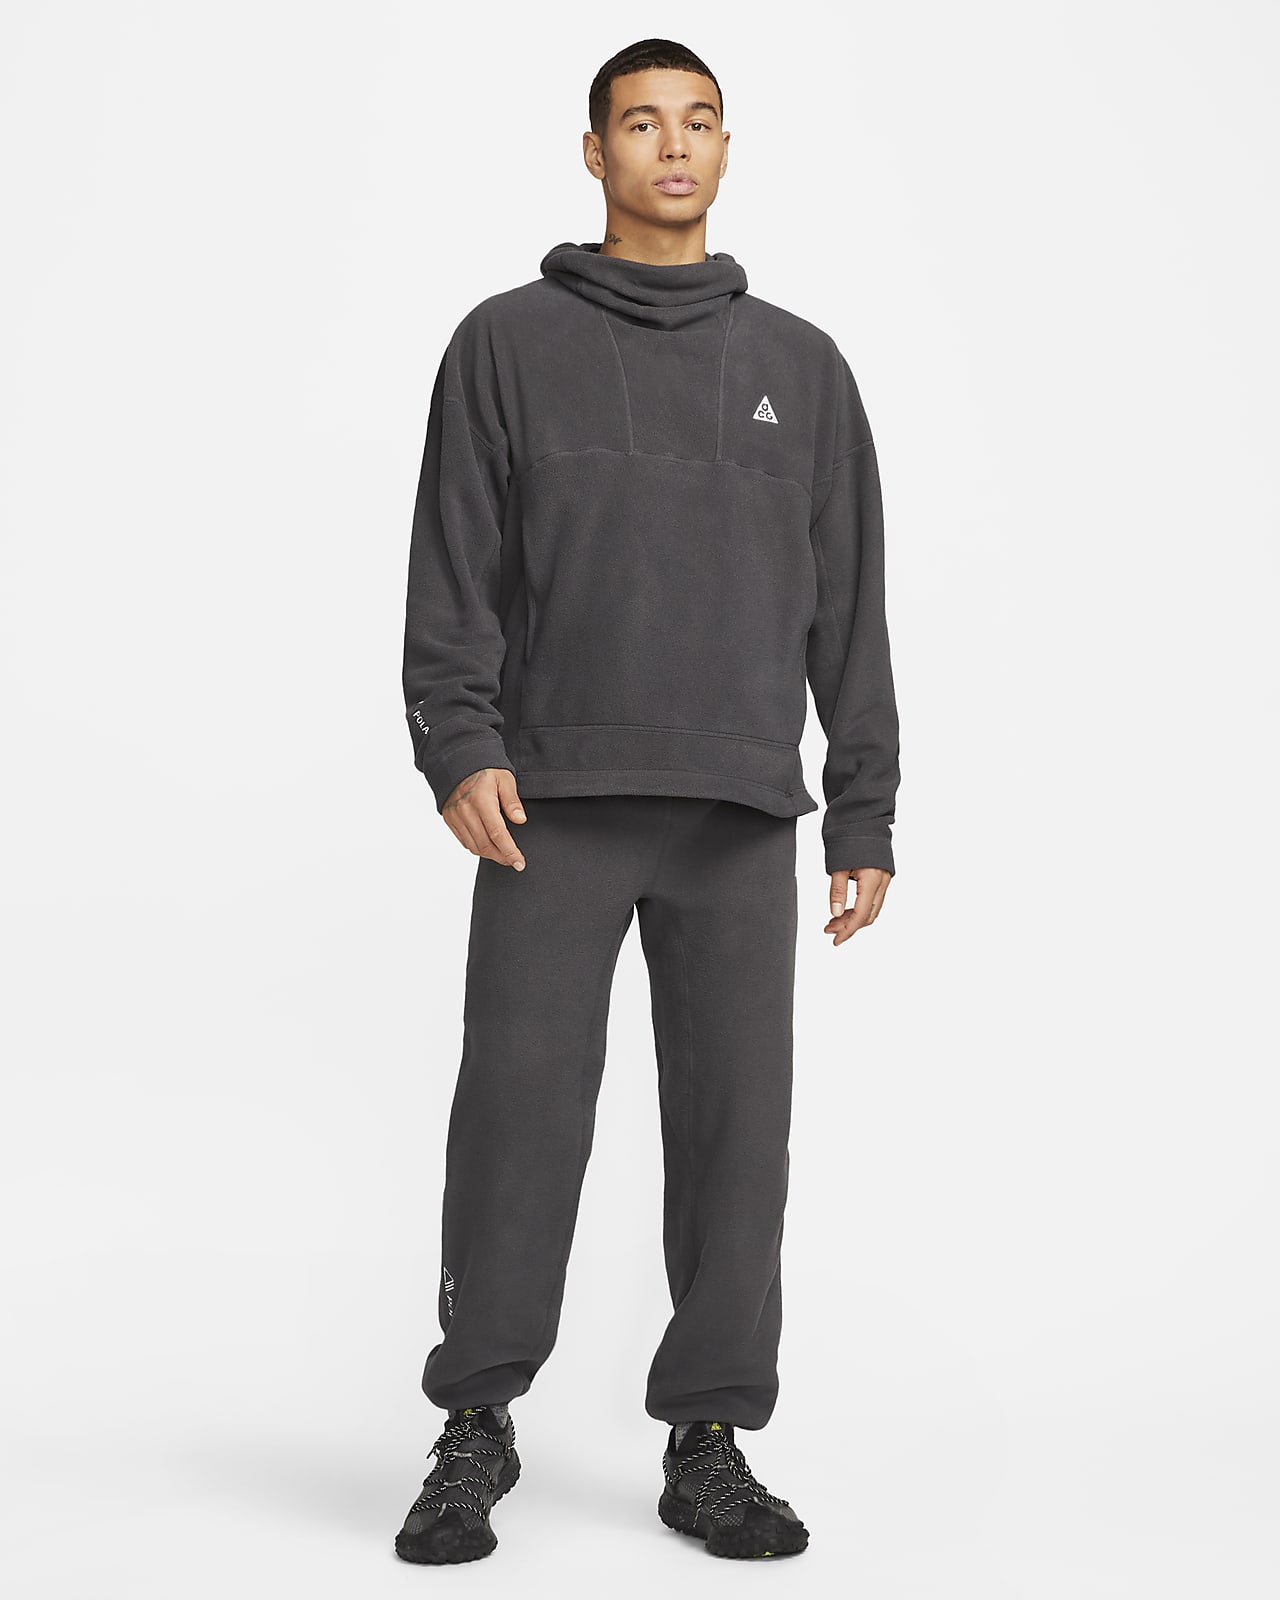 Nike Therma-FIT "Wolf Tree" Men's Pullover Nike.com